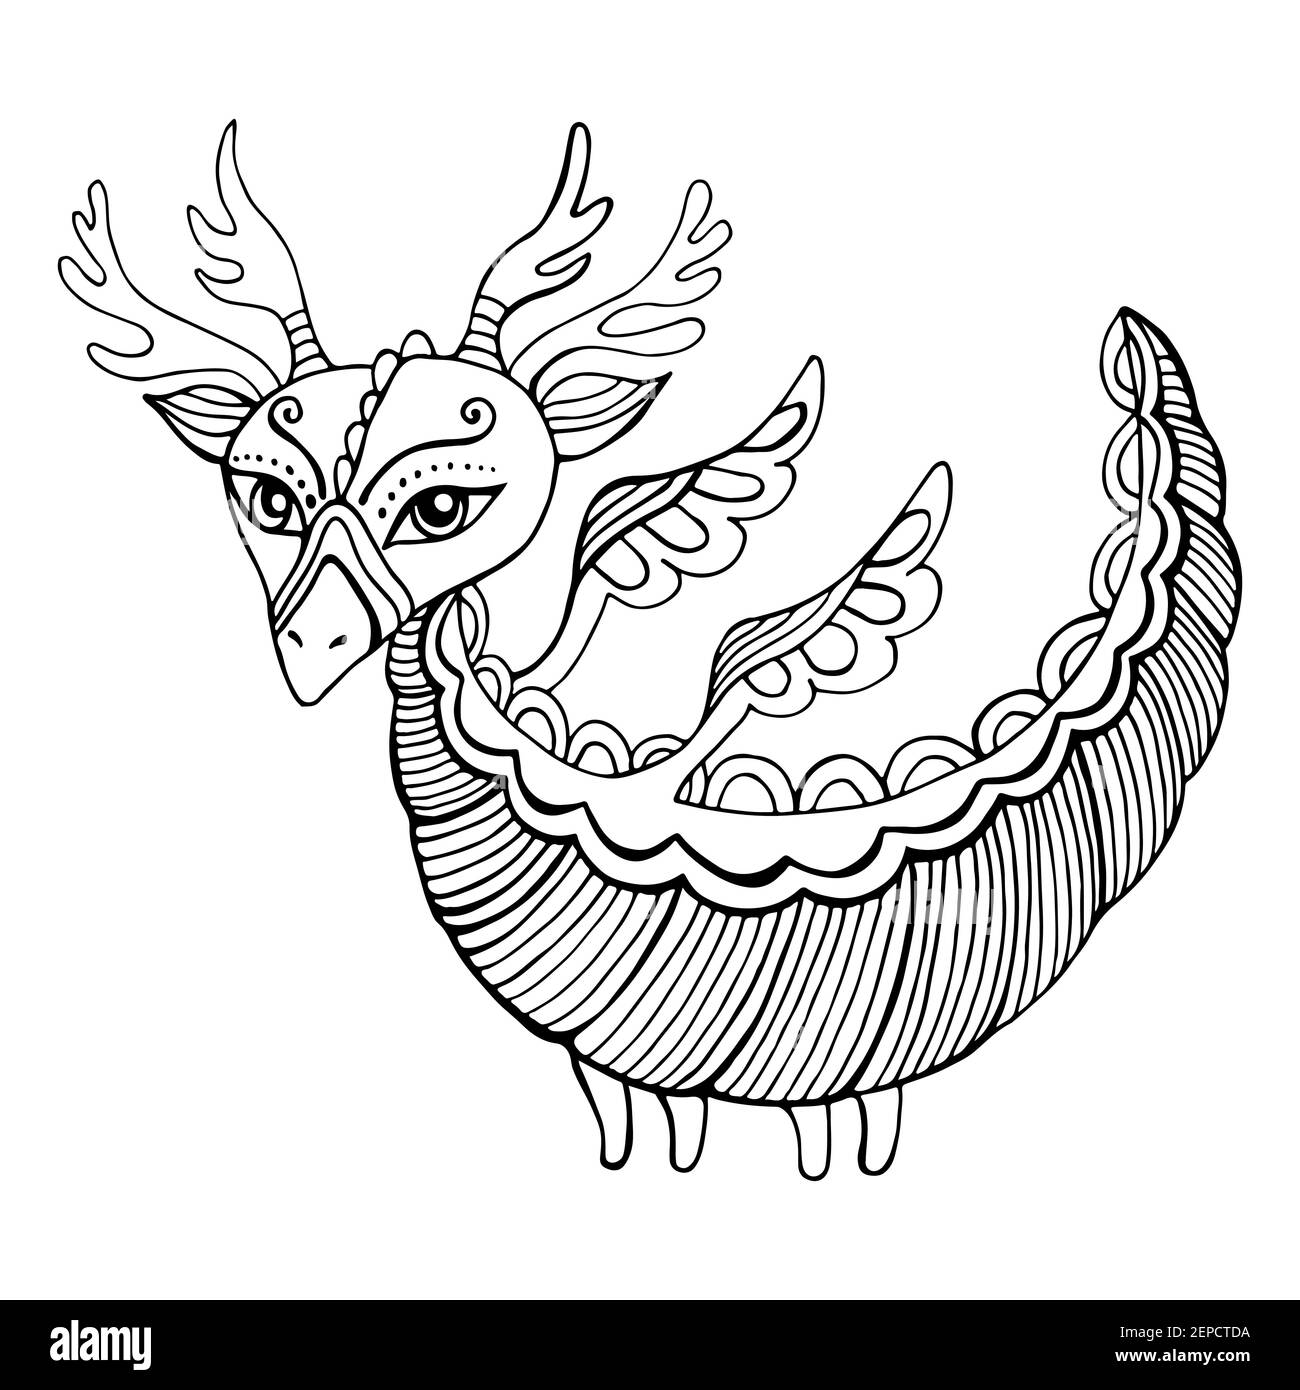 Fantasy cartoon Dragon coloring page for kids and adults. Cute doodle style character Little dragon with wings and horns, fantastic animal. Stock Vector